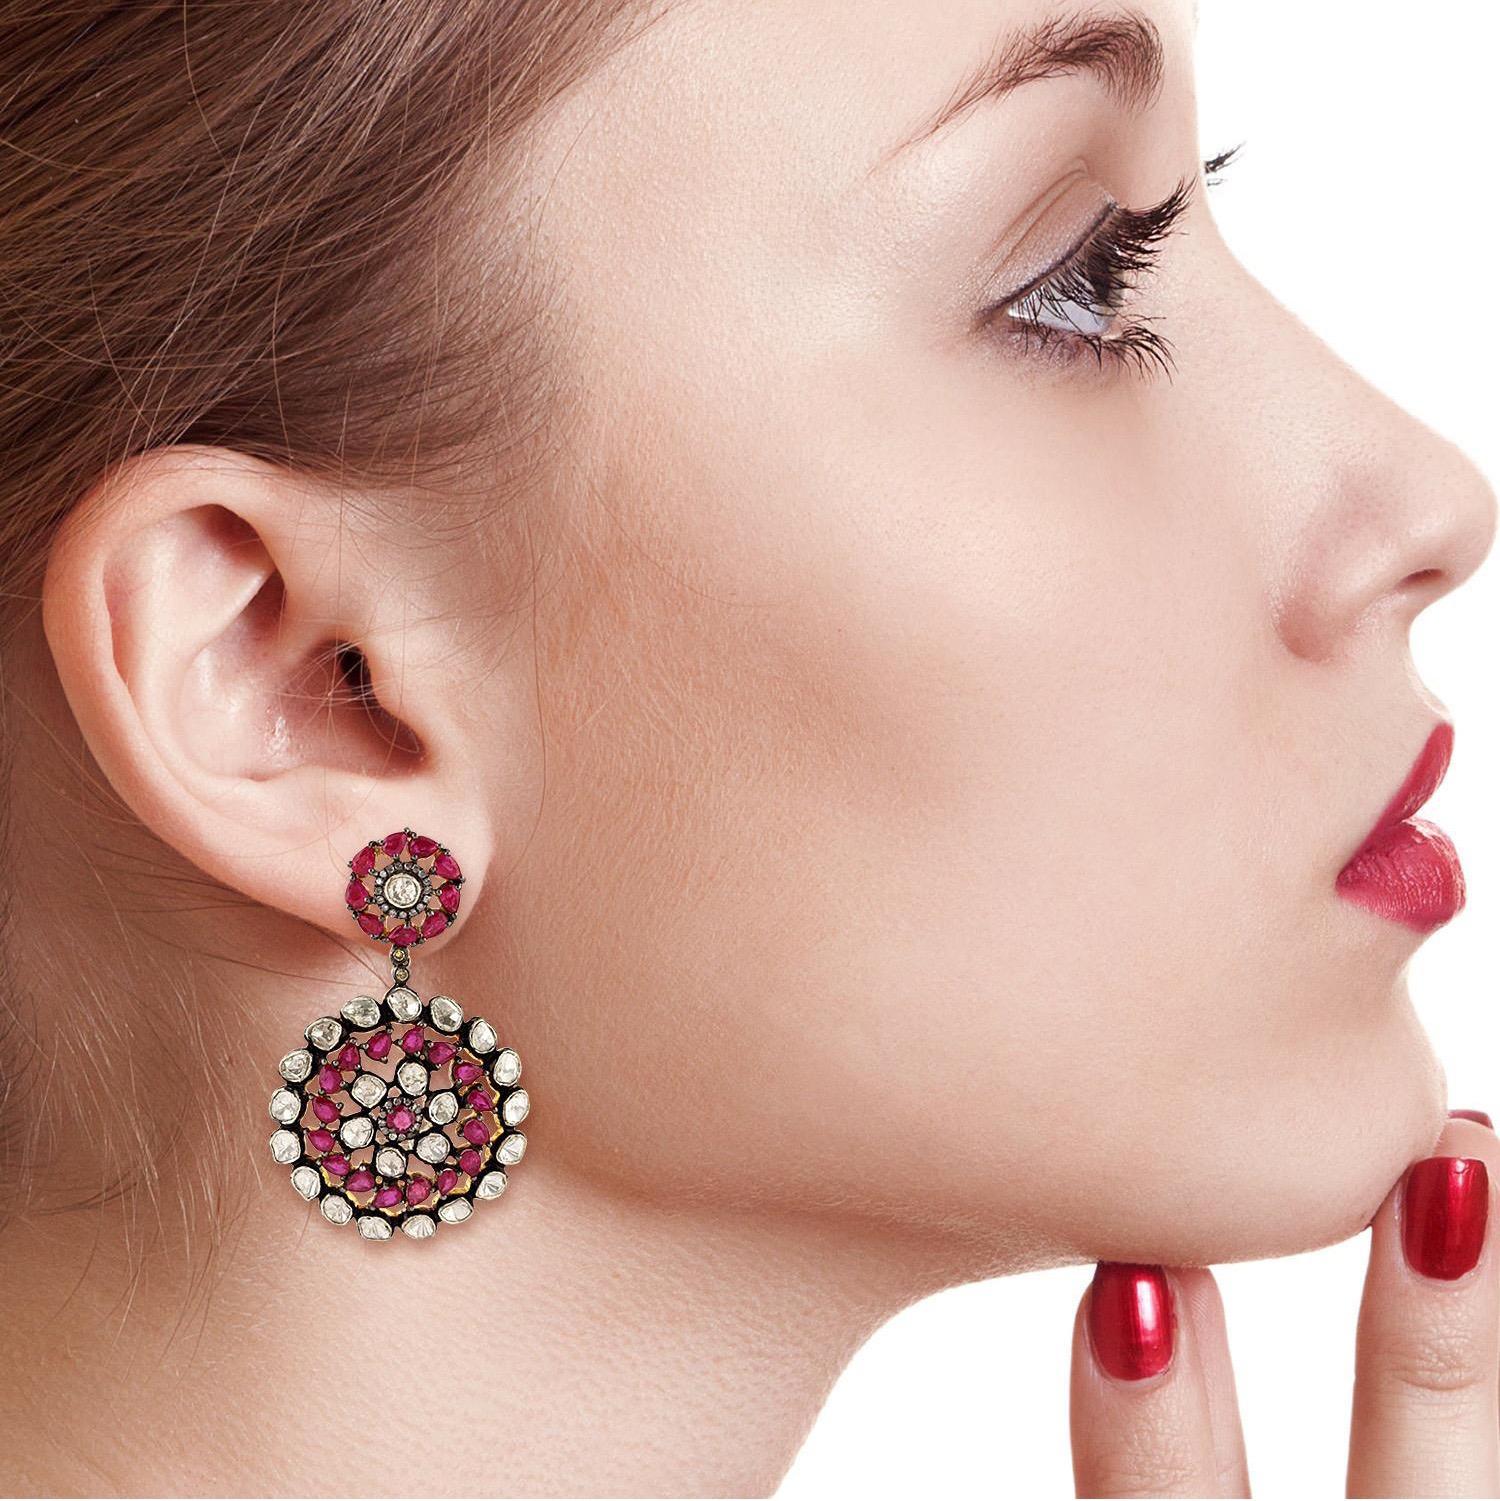 Handcrafted from 18-karat gold & sterling silver, these earrings are set with 10.5 carats of ruby and 7.5 carats diamonds with blackened finish.

FOLLOW  MEGHNA JEWELS storefront to view the latest collection & exclusive pieces.  Meghna Jewels is